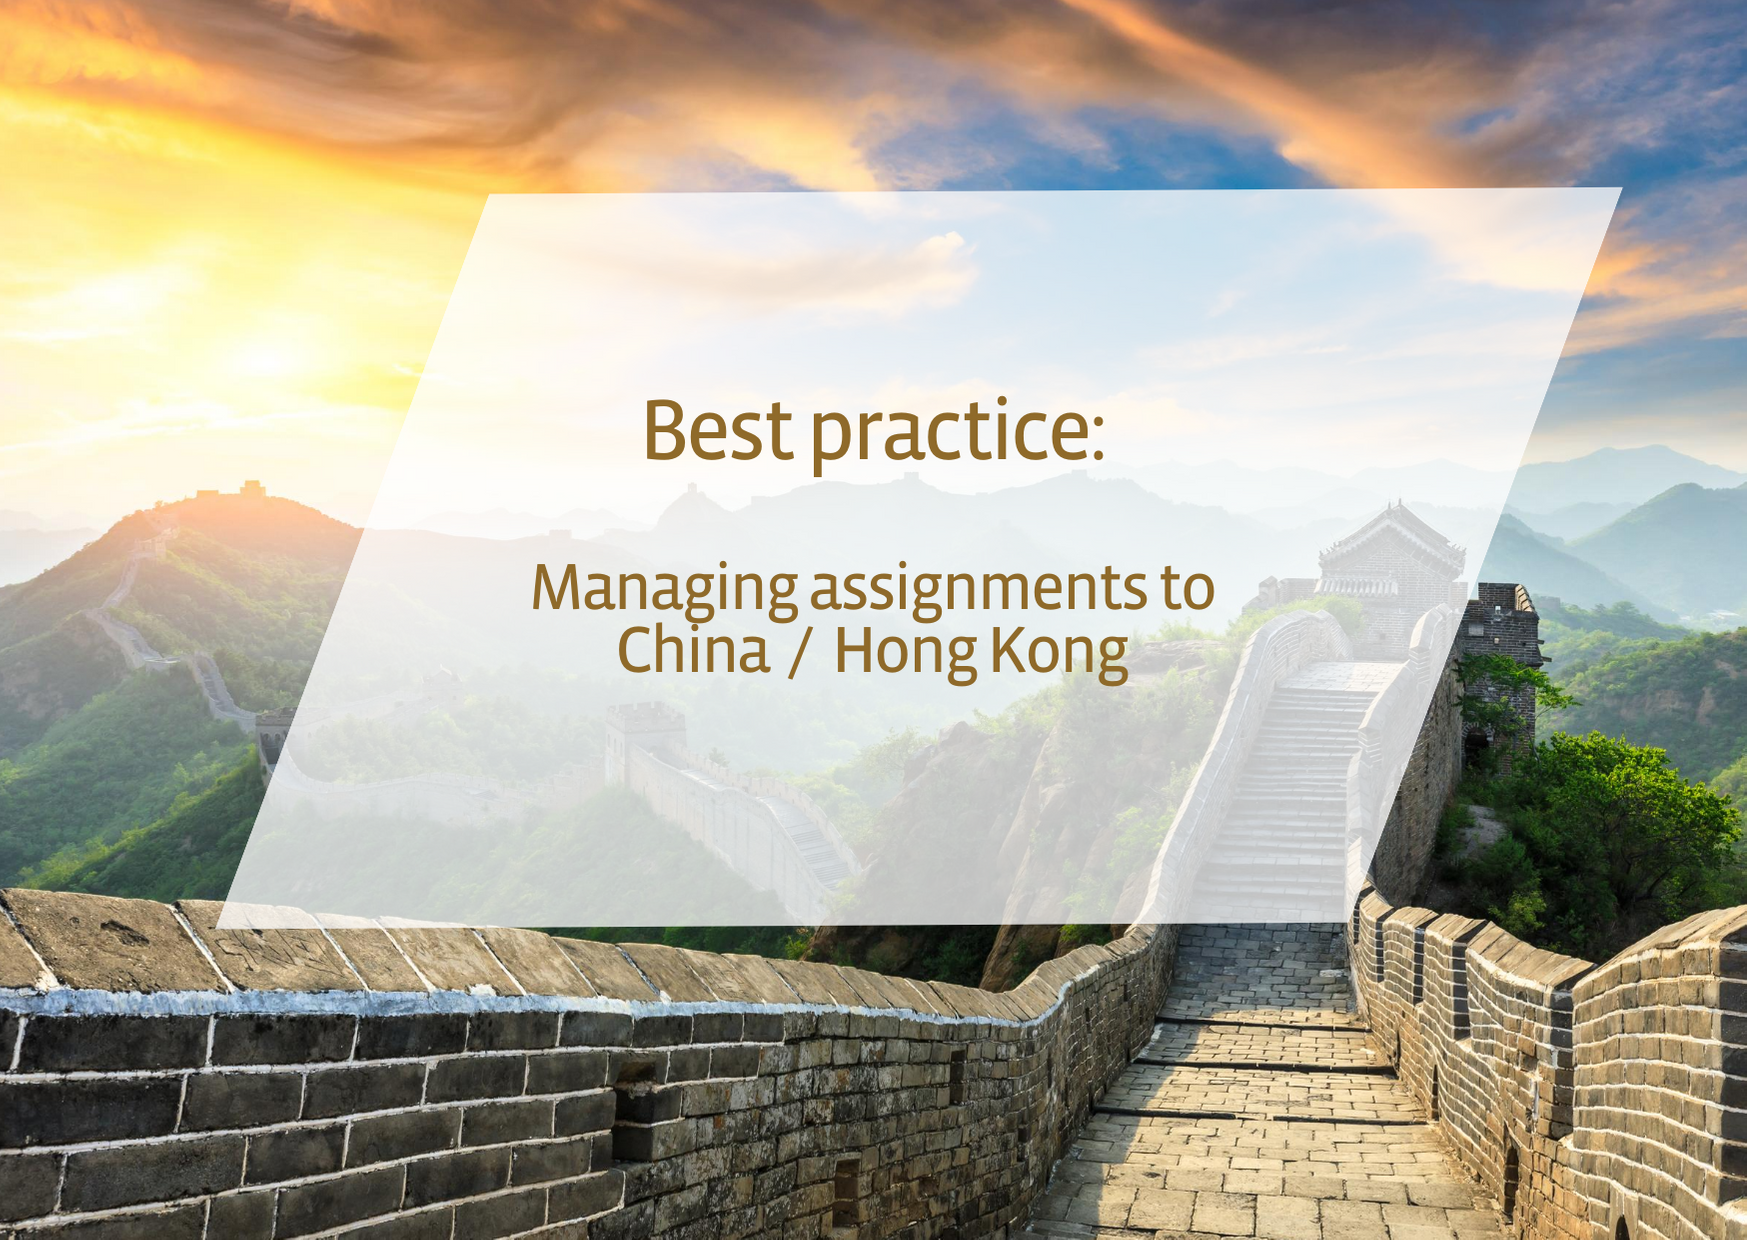 Best practice: Managing assignments to China/Hong Kong